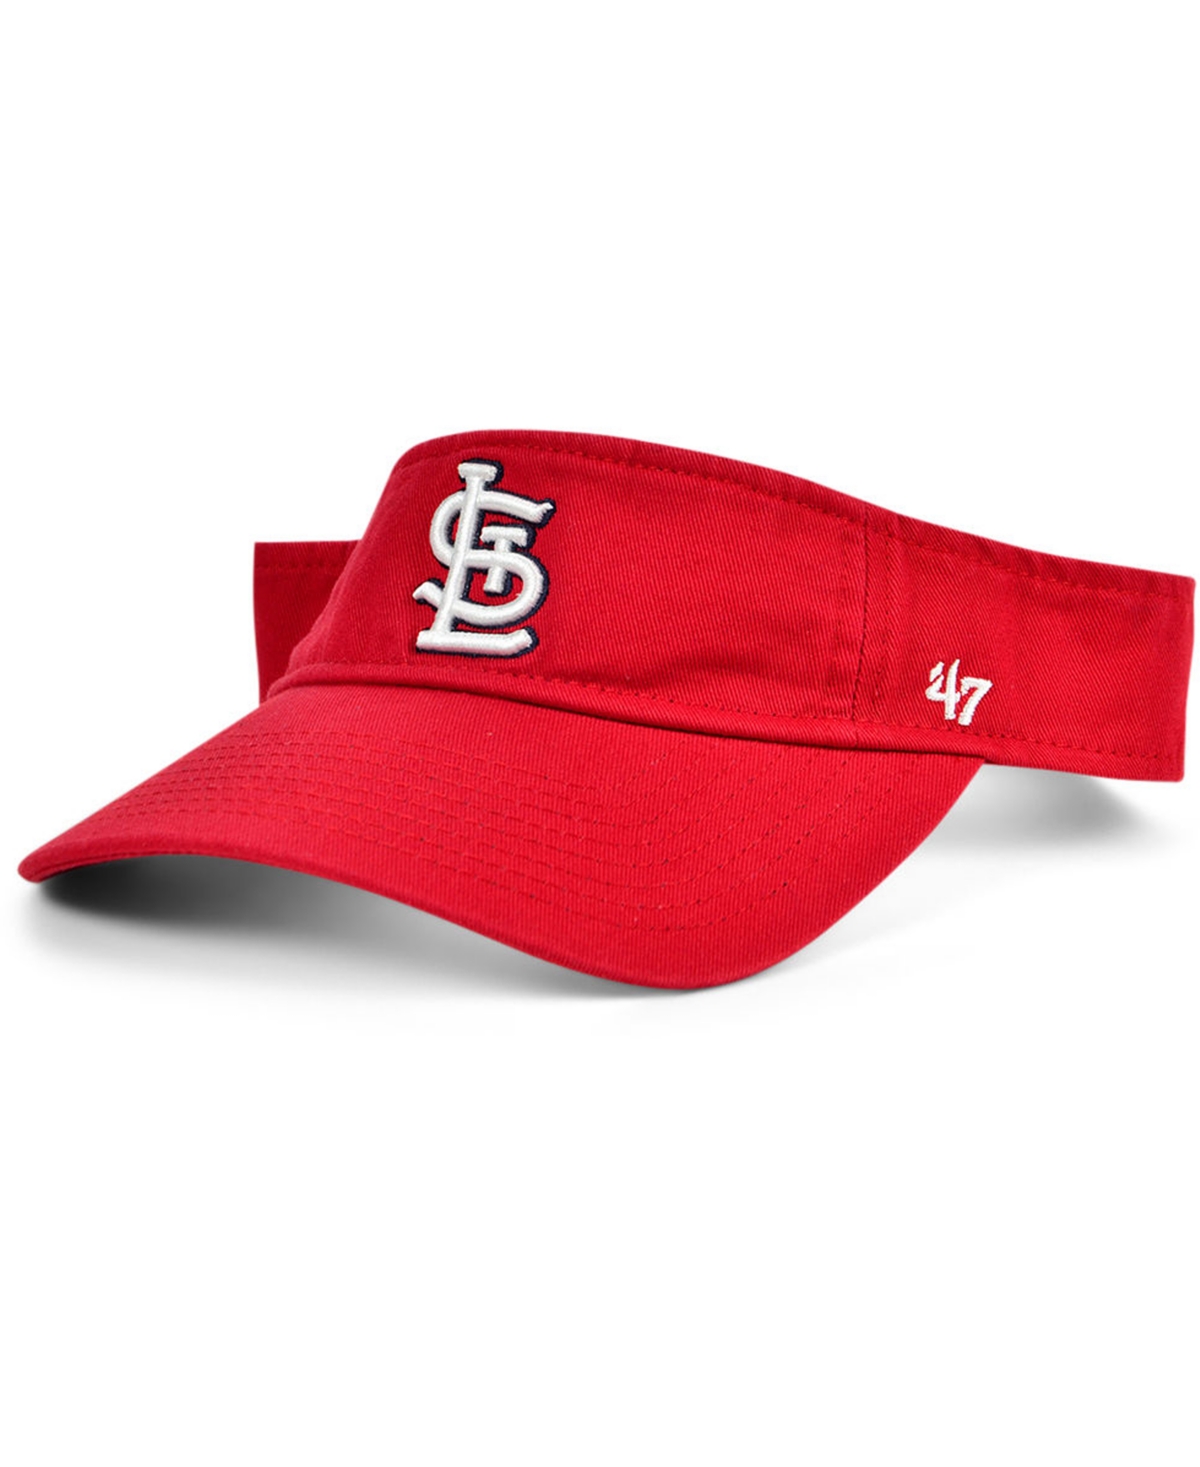 St. Louis Cardinals 2020 Clean Up Visor - Red